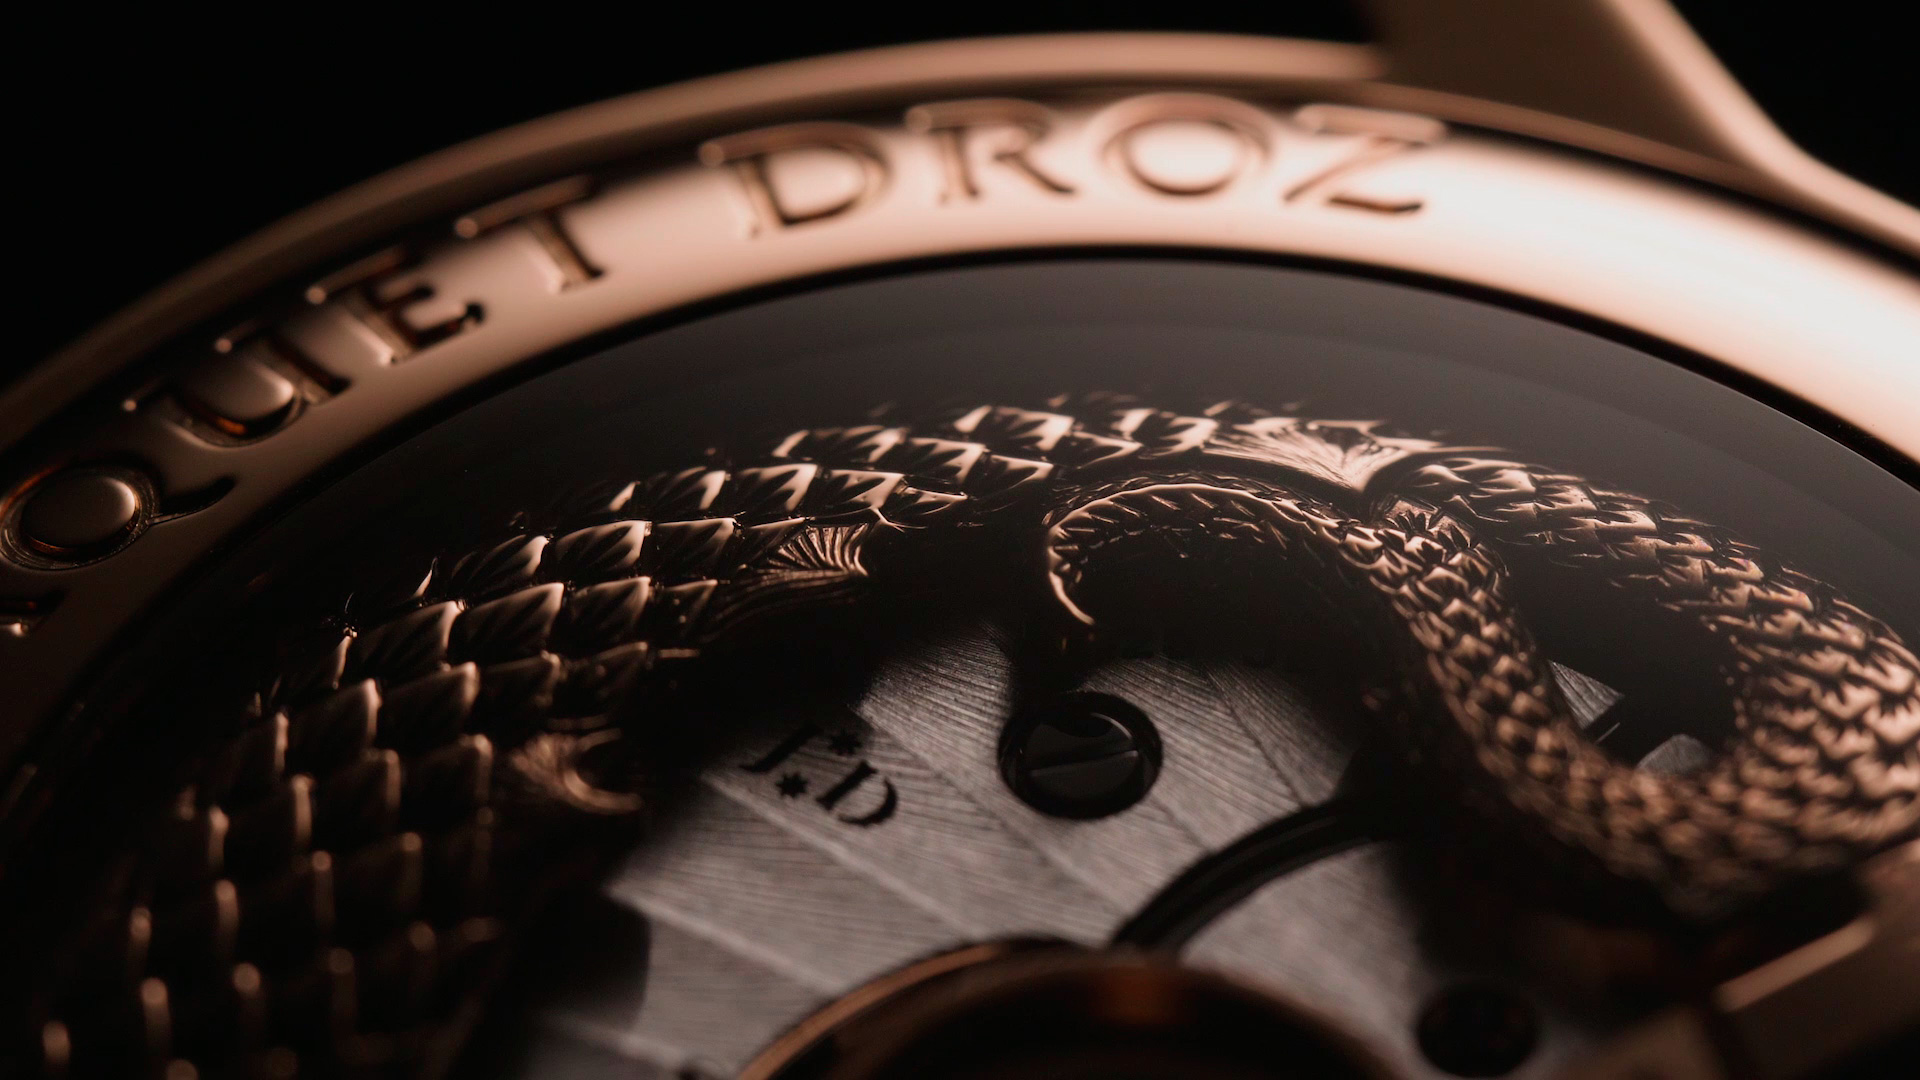 How To Train A Dragon: Jaquet Droz Collaborates With John Howe